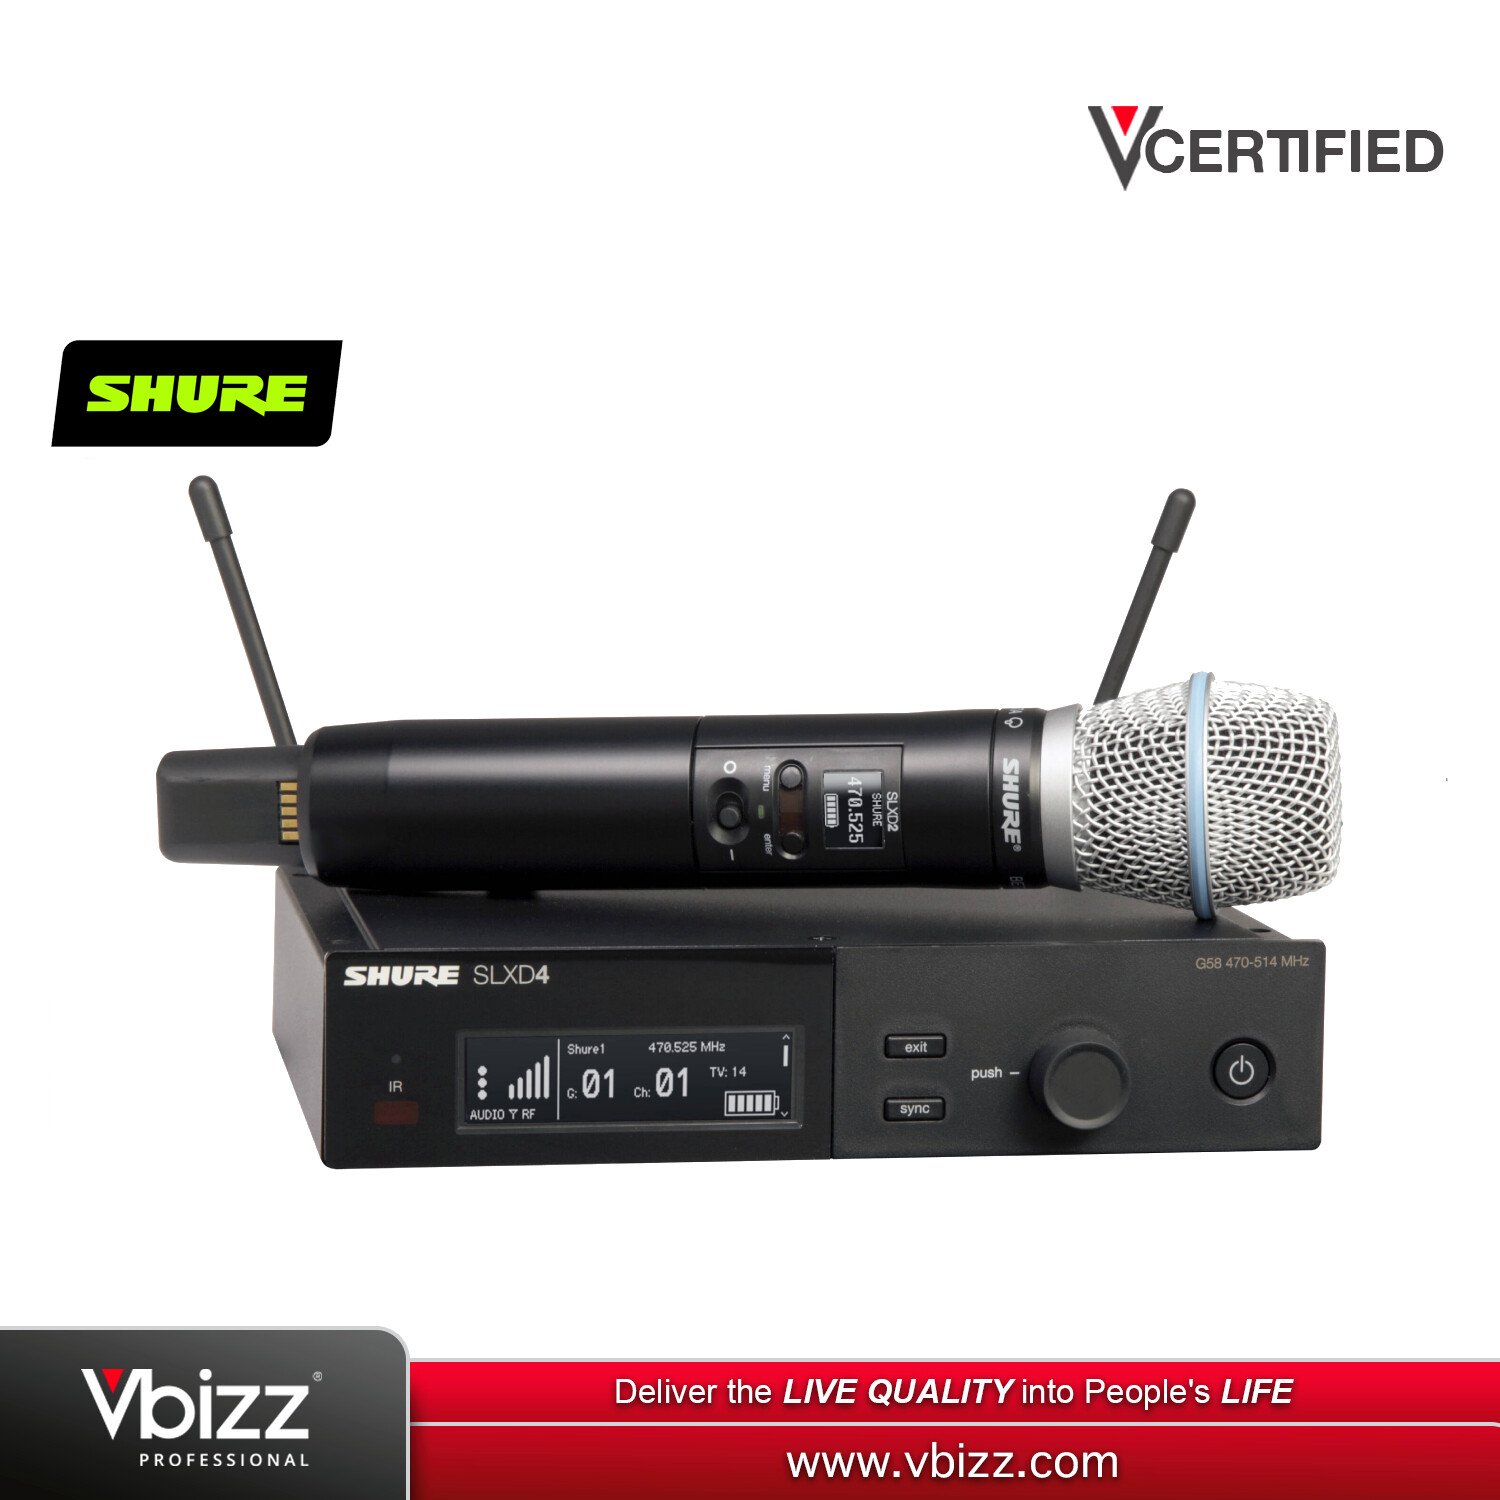 Digital　Vbizz　Microphone　with　87A　Capsule　Wireless　Beta　Handheld　System　SHURE　SLXD24A/B87A